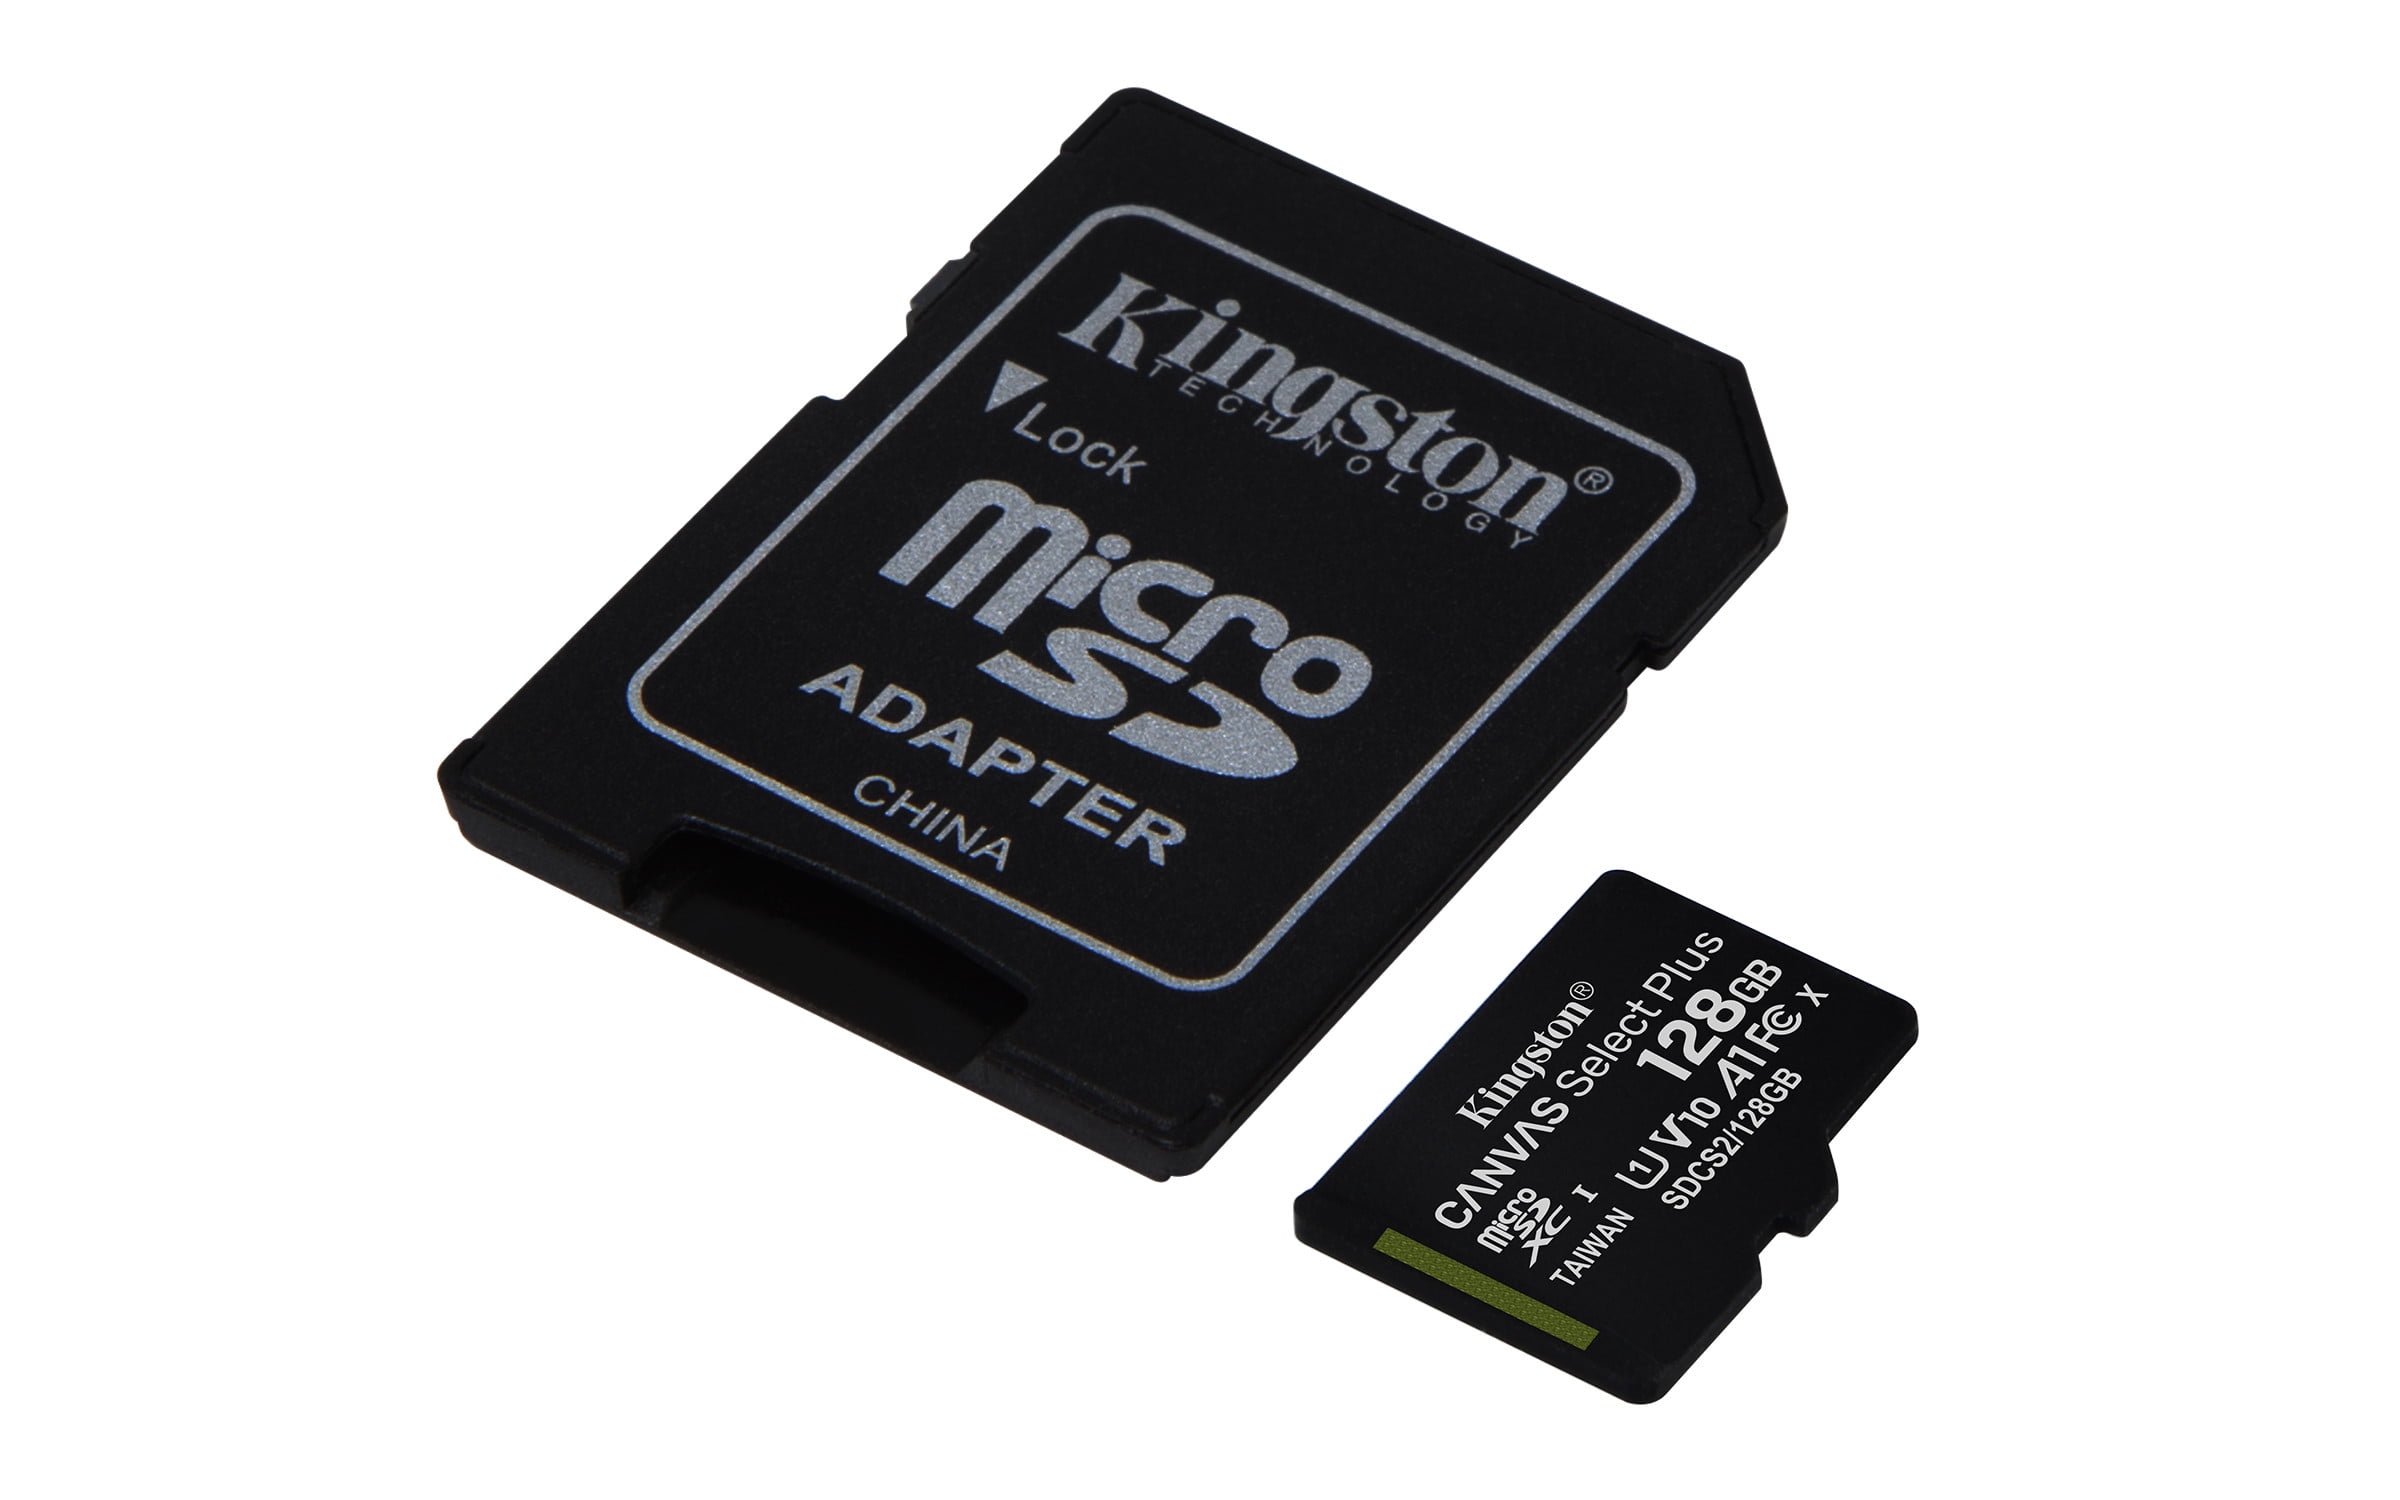 New Authentic & GENUINE KINGSTON MICRO SD SDHC MEMORY CARD CLASS 4 WITH ADAPTER 